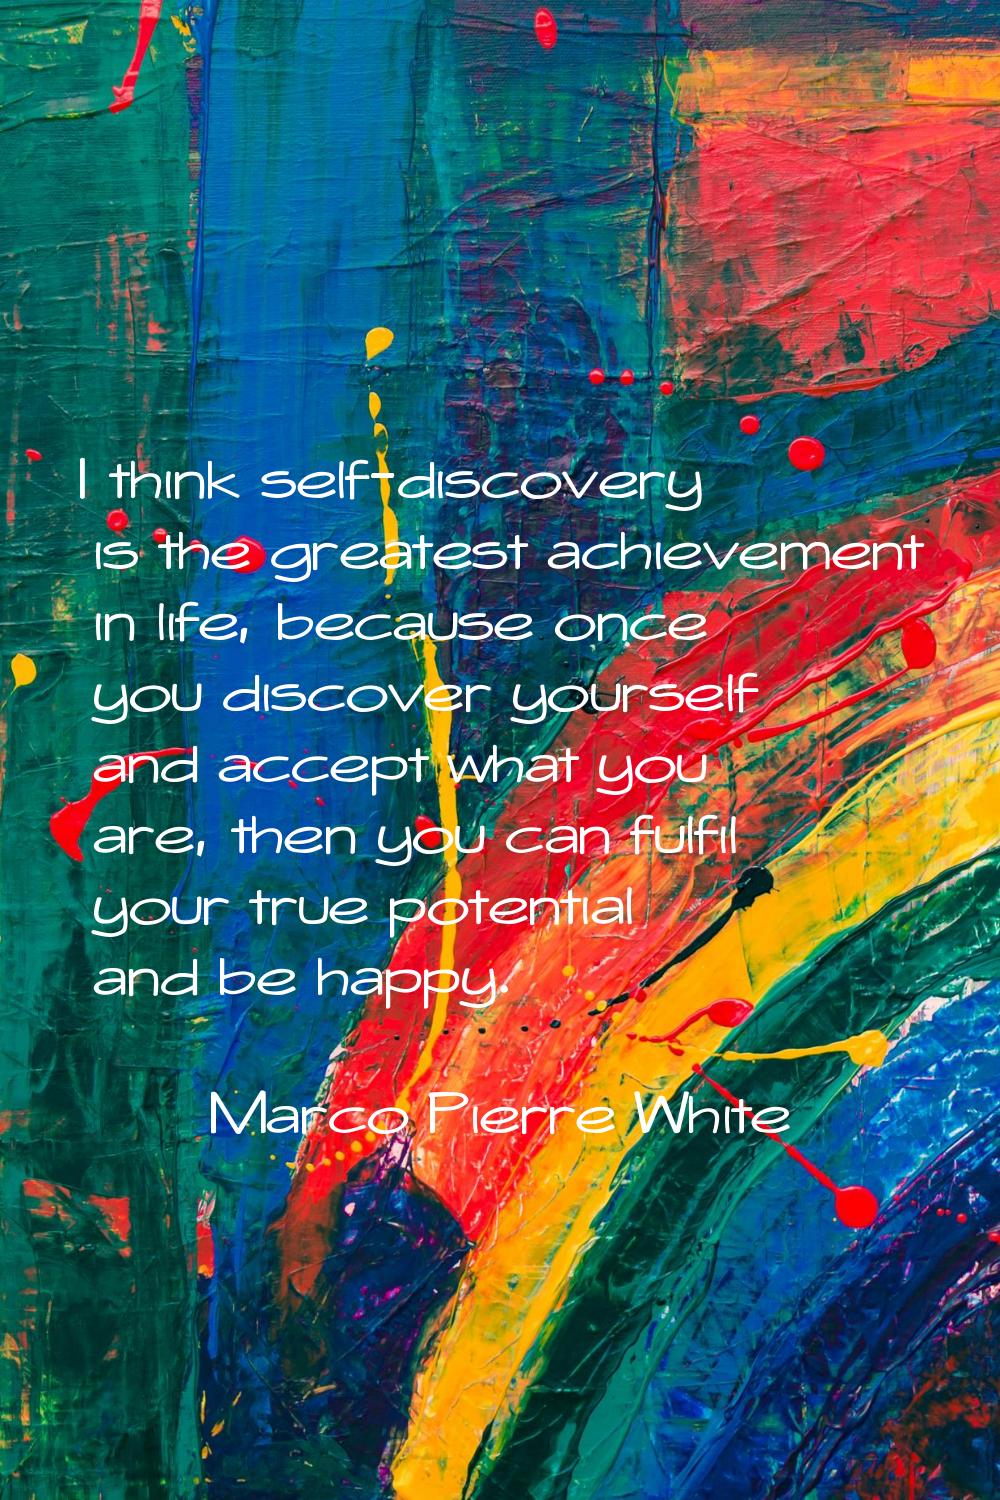 I think self-discovery is the greatest achievement in life, because once you discover yourself and 